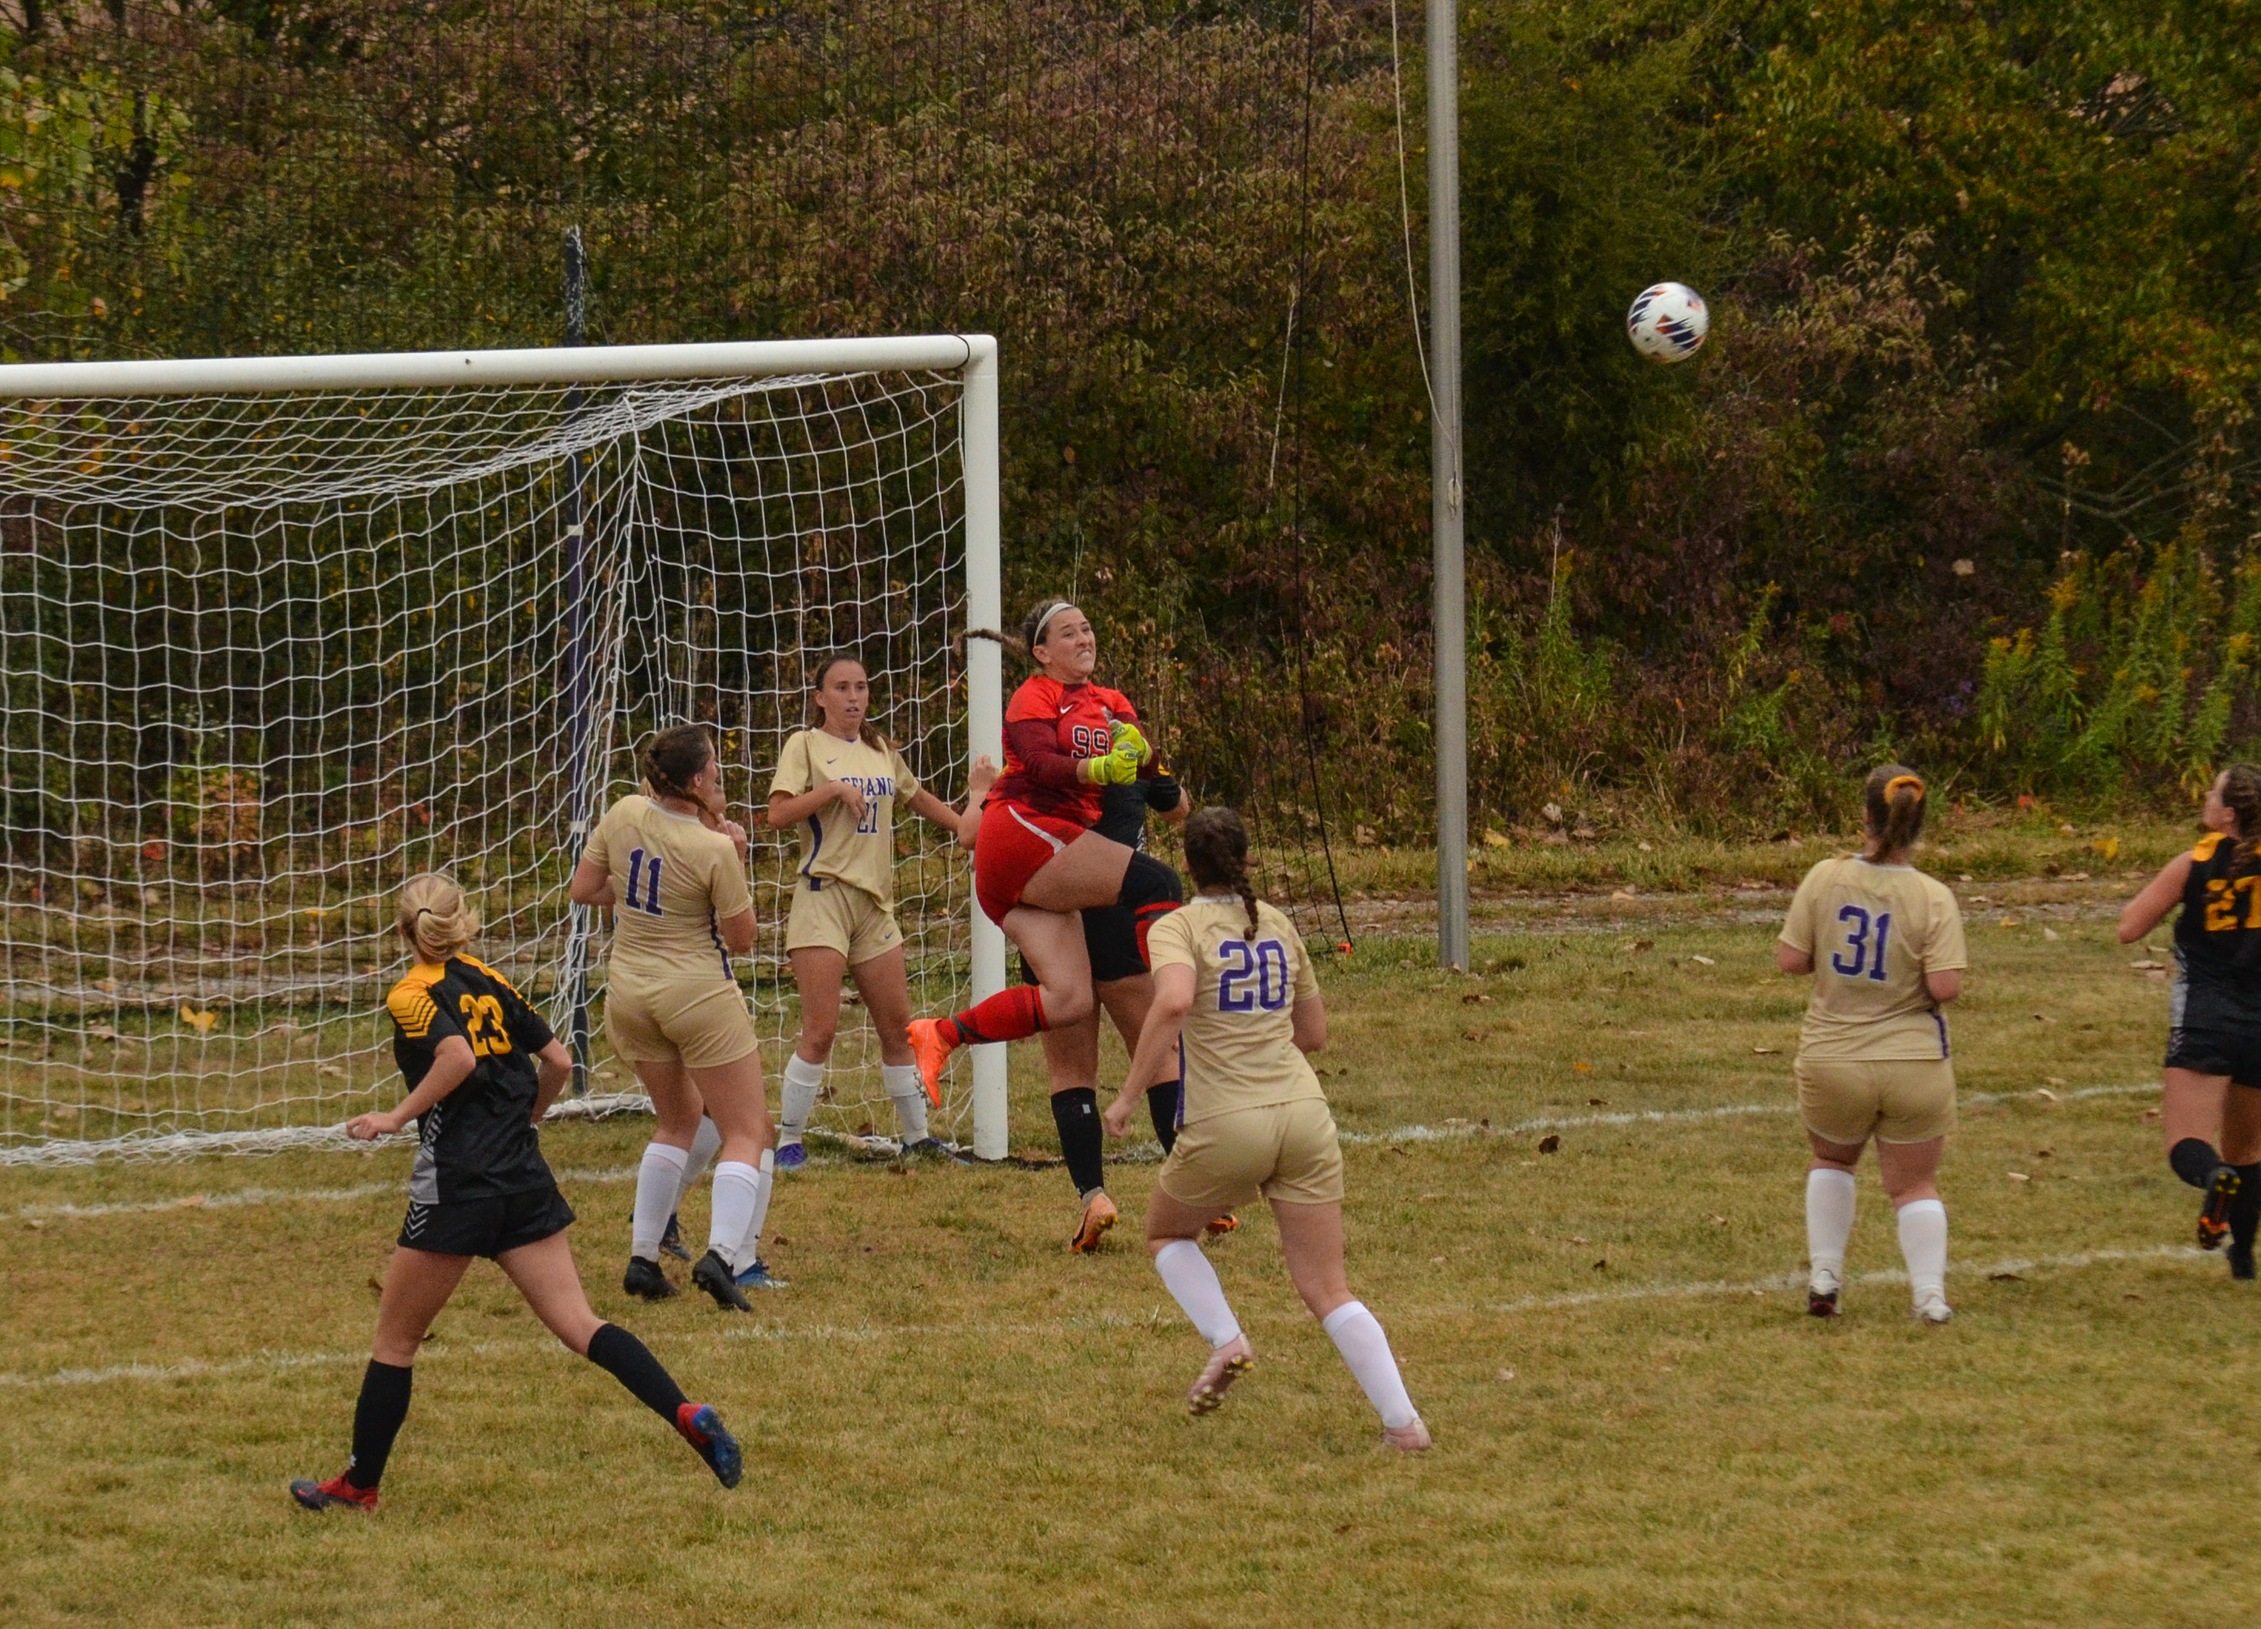 Wet Wednesday at Winsper Knobel ends in 2-1 loss in Jackets’ conference opener